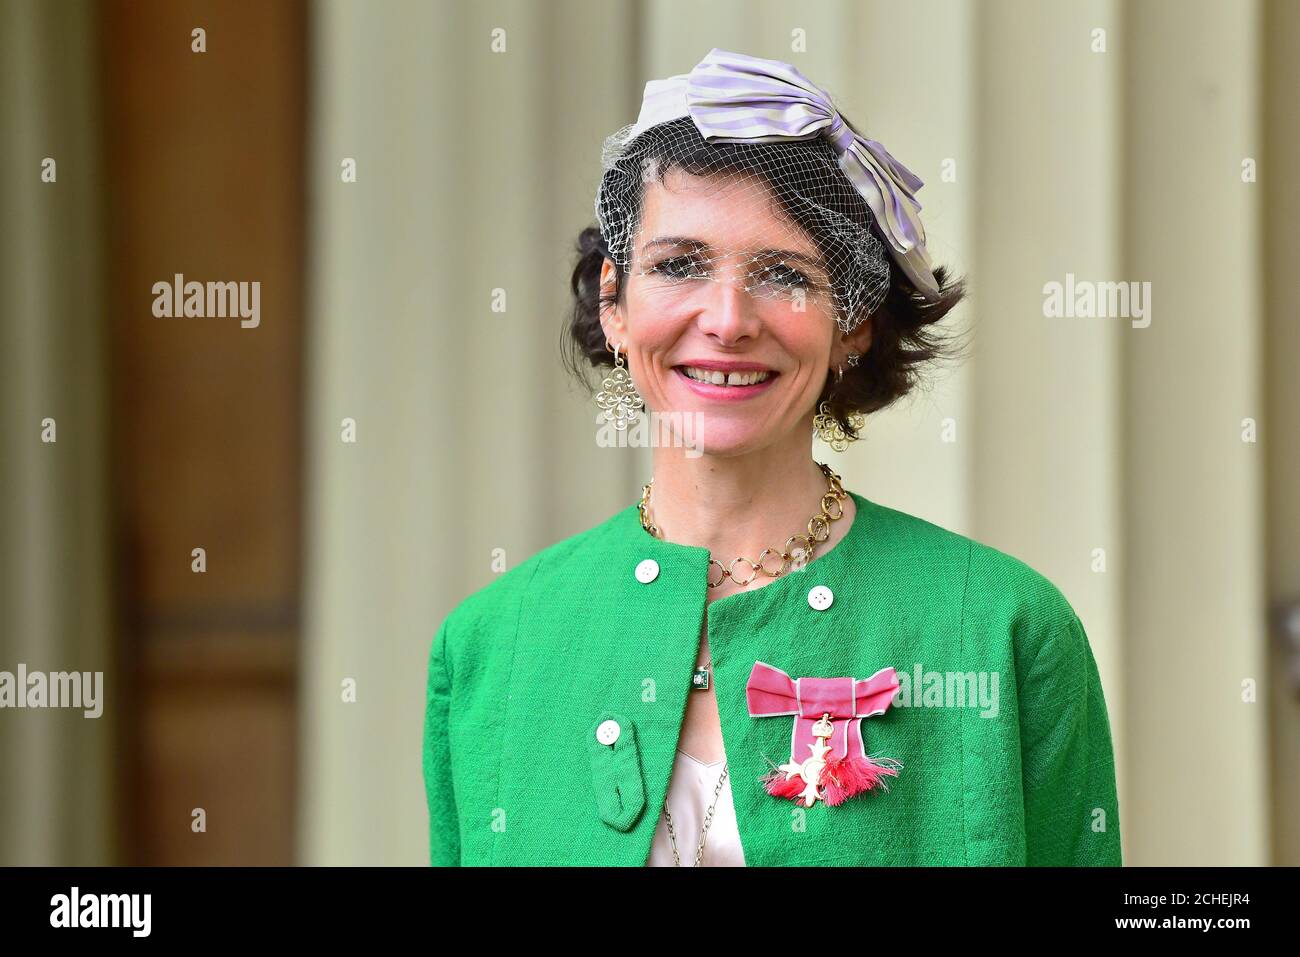 Thomasina Miers after being made an OBE (Officer of the Order of the British Empire) by the Duke of Cambridge at an investiture ceremony at Buckingham Palace, London. Stock Photo